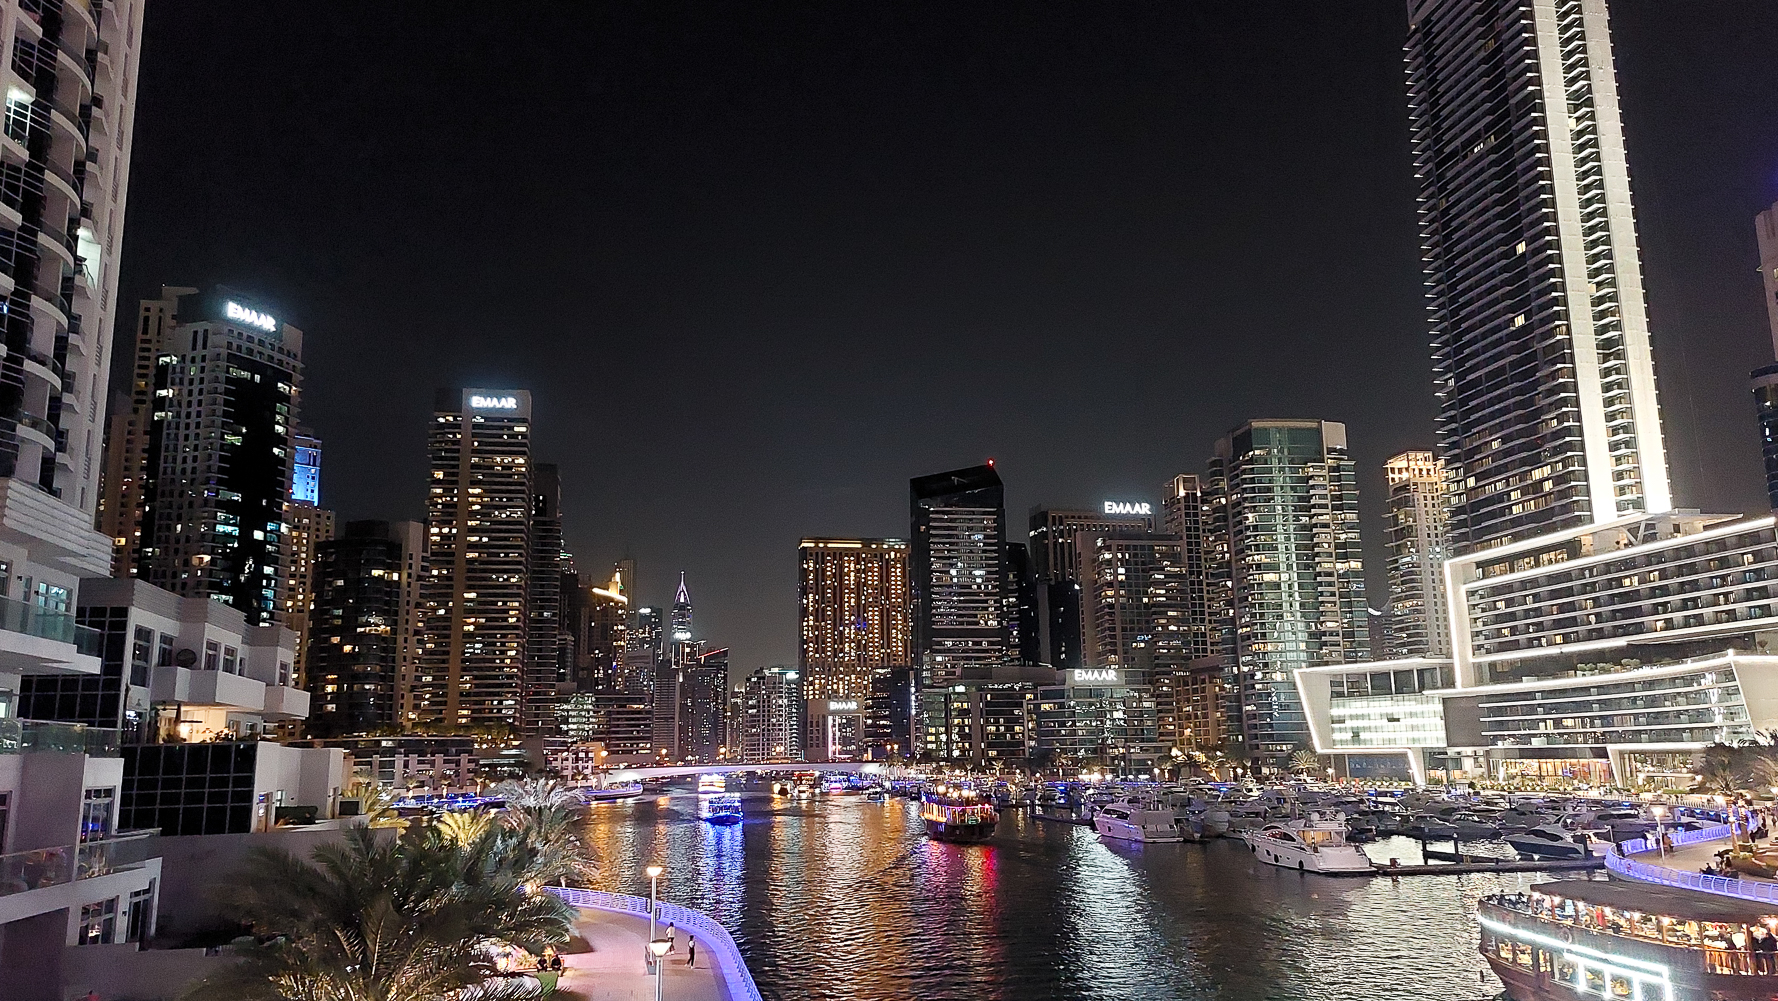 <span  class="uc_style_uc_tiles_grid_image_elementor_uc_items_attribute_title" style="color:#ffffff;">Dubai City at night</span>